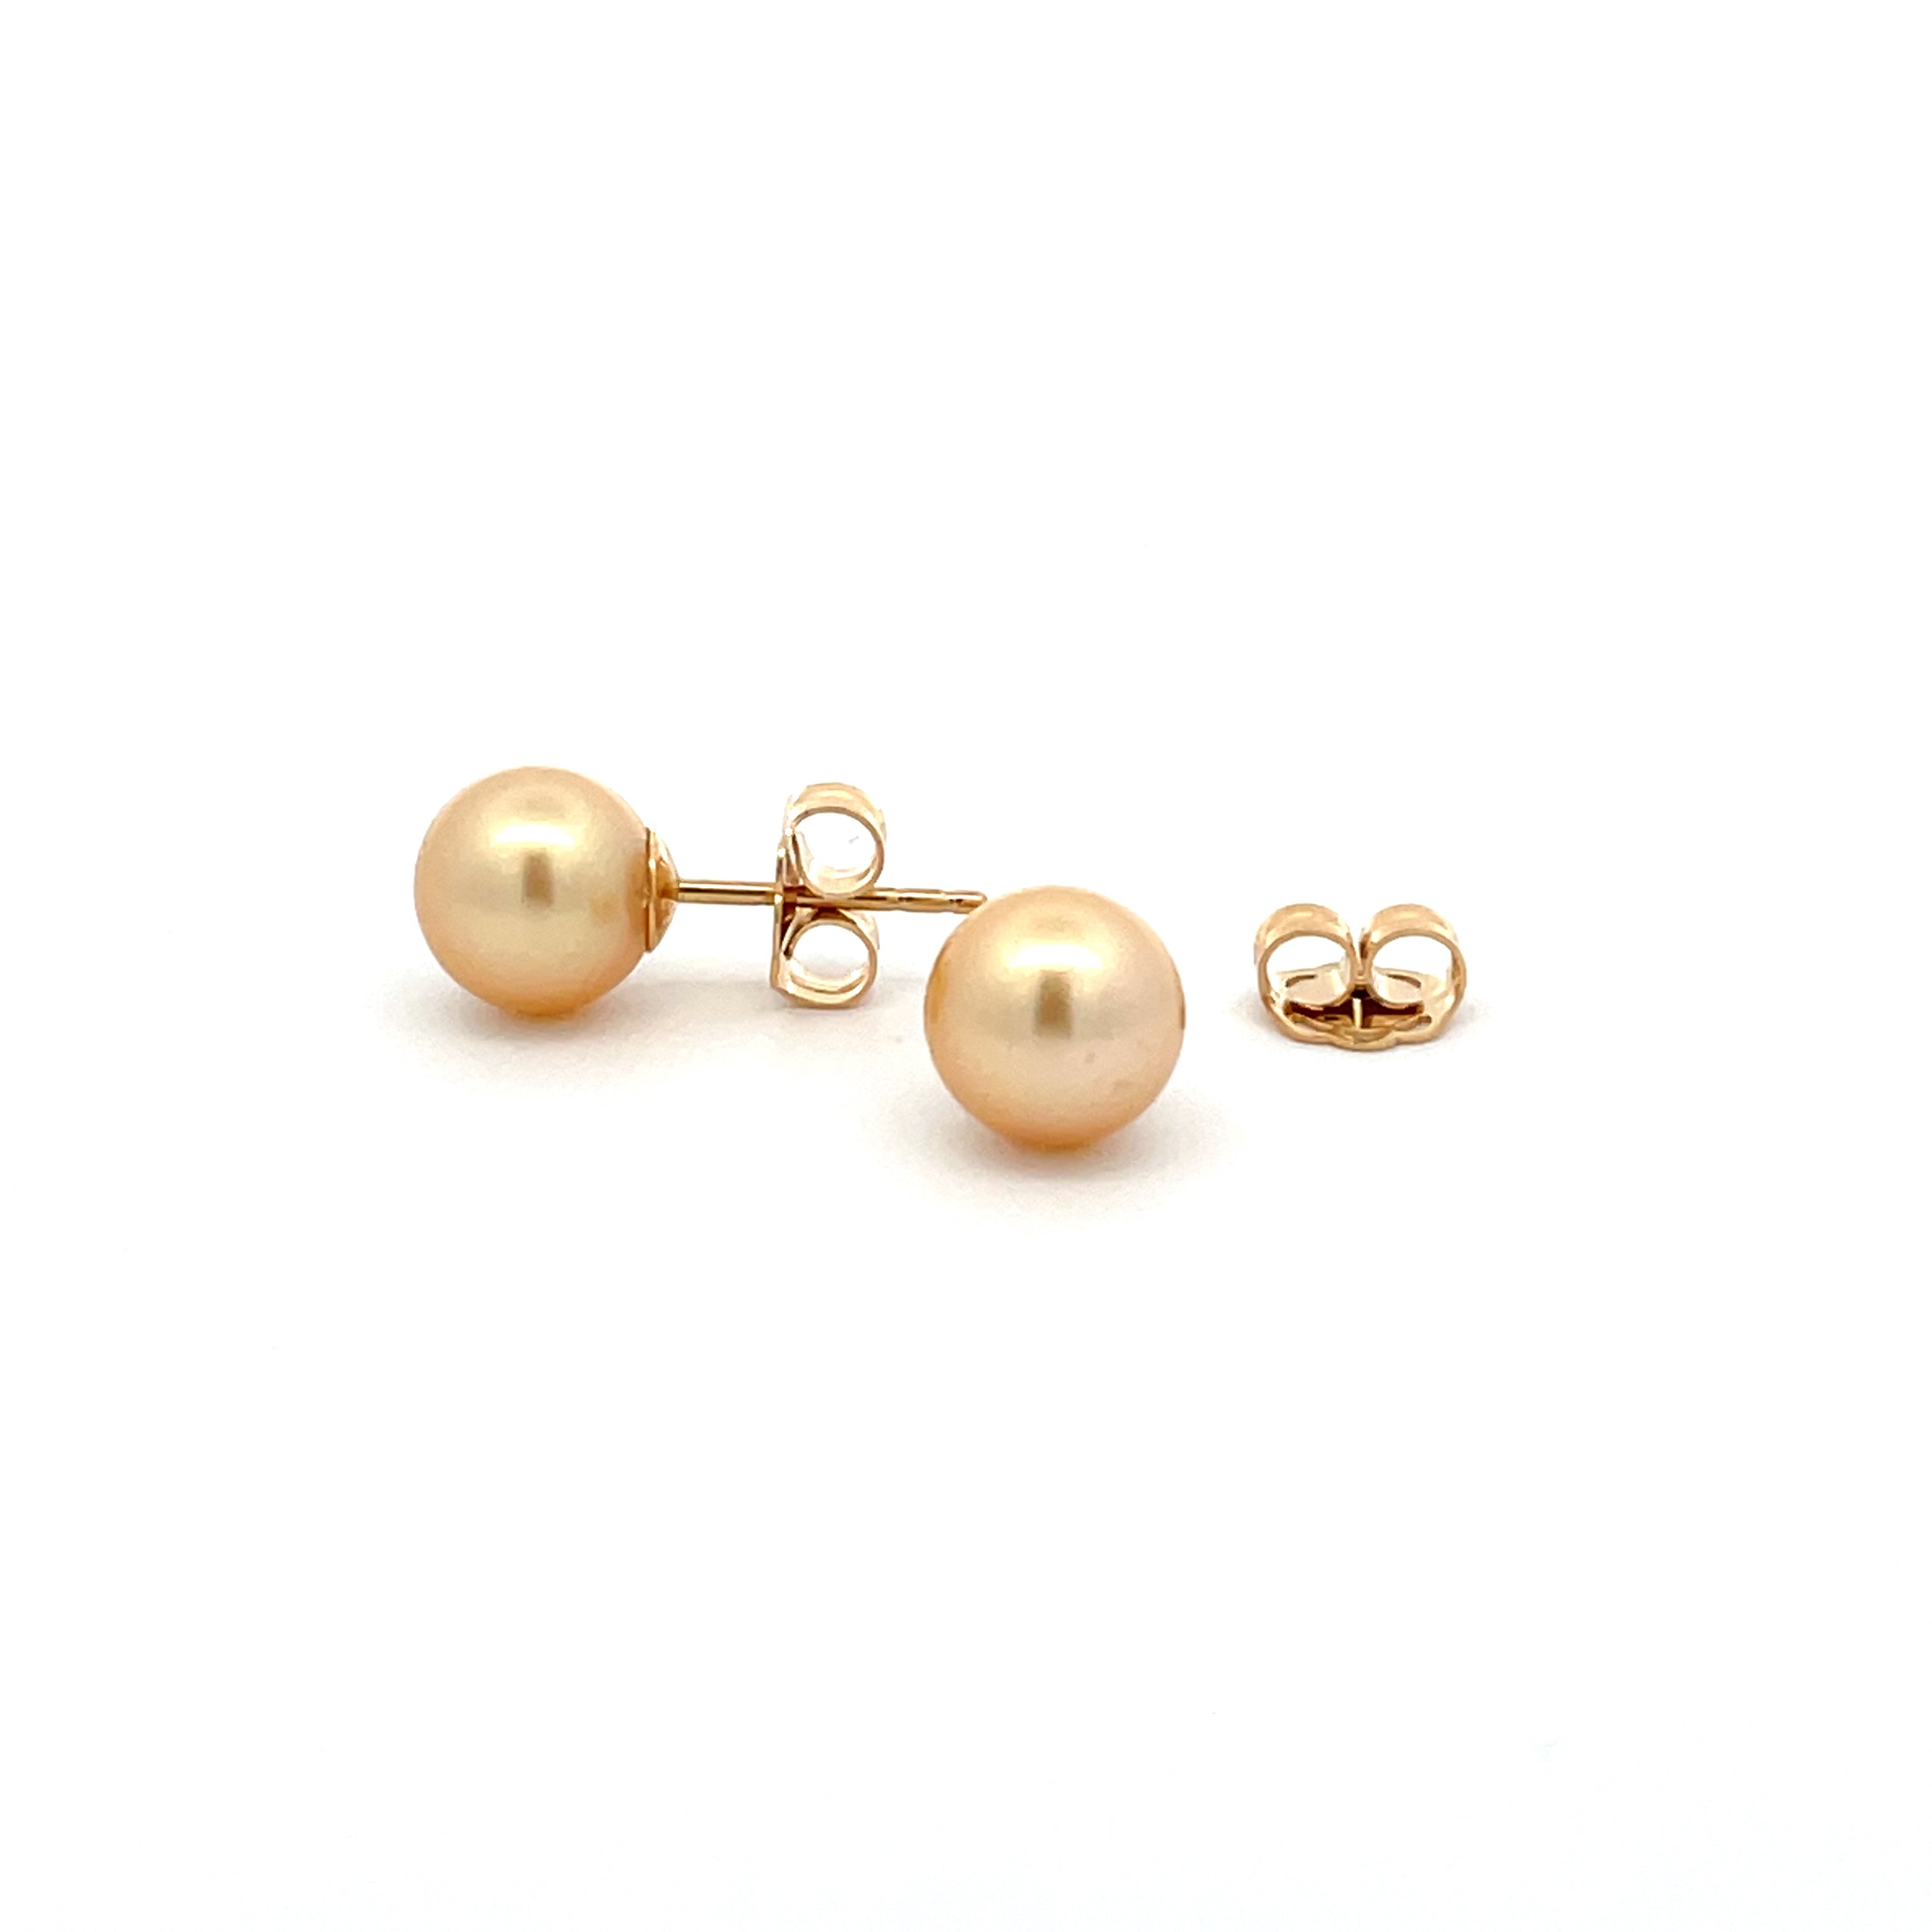 18K Yellow Gold South Sea Cultured 7-8 mm Pearl Stud Earrings